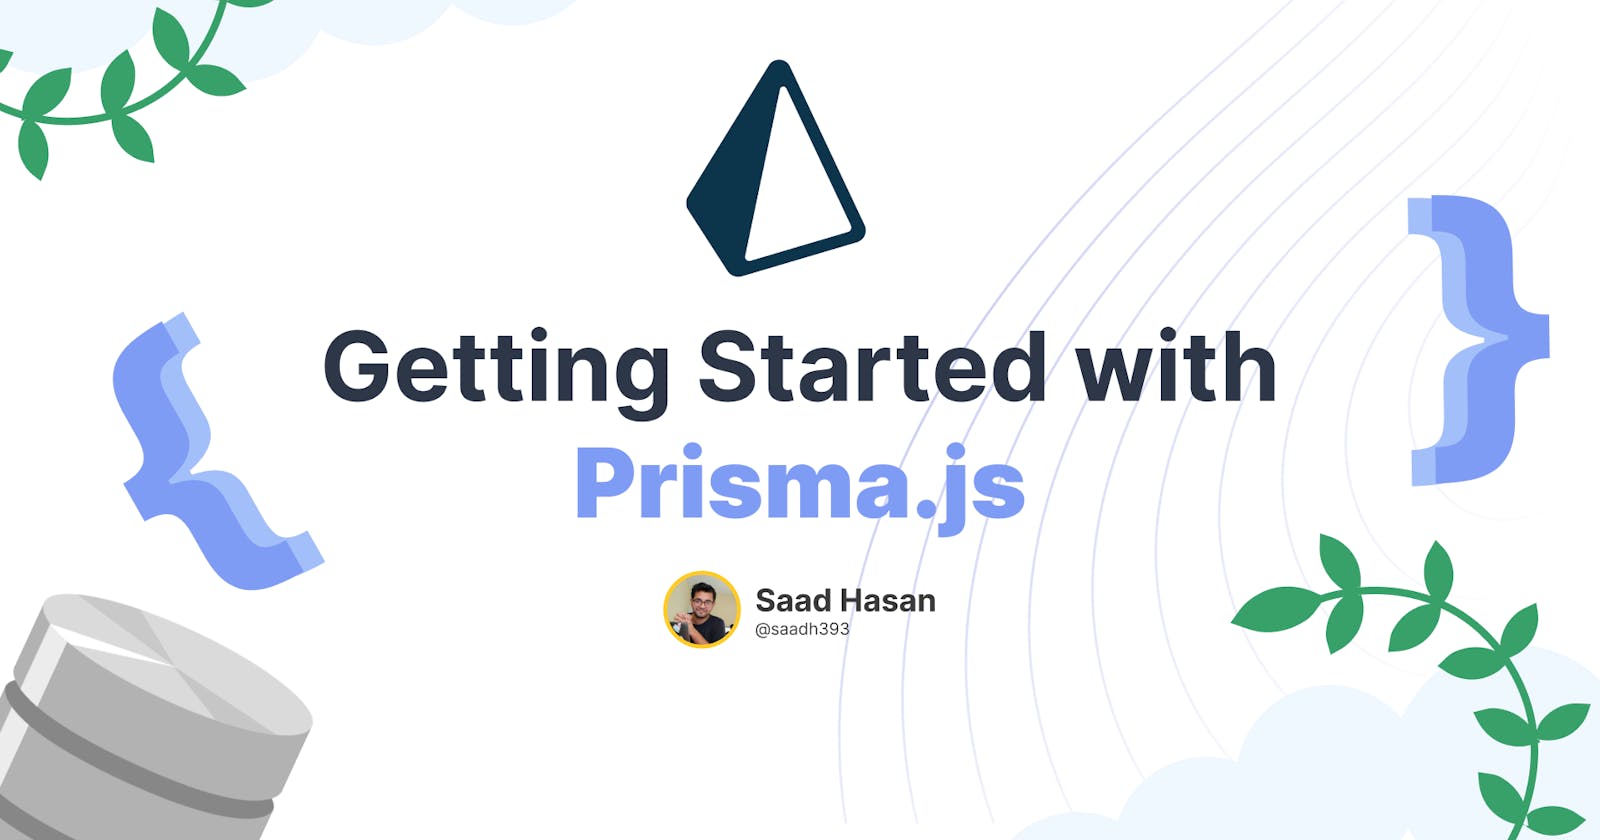 Getting Started with Prisma.js